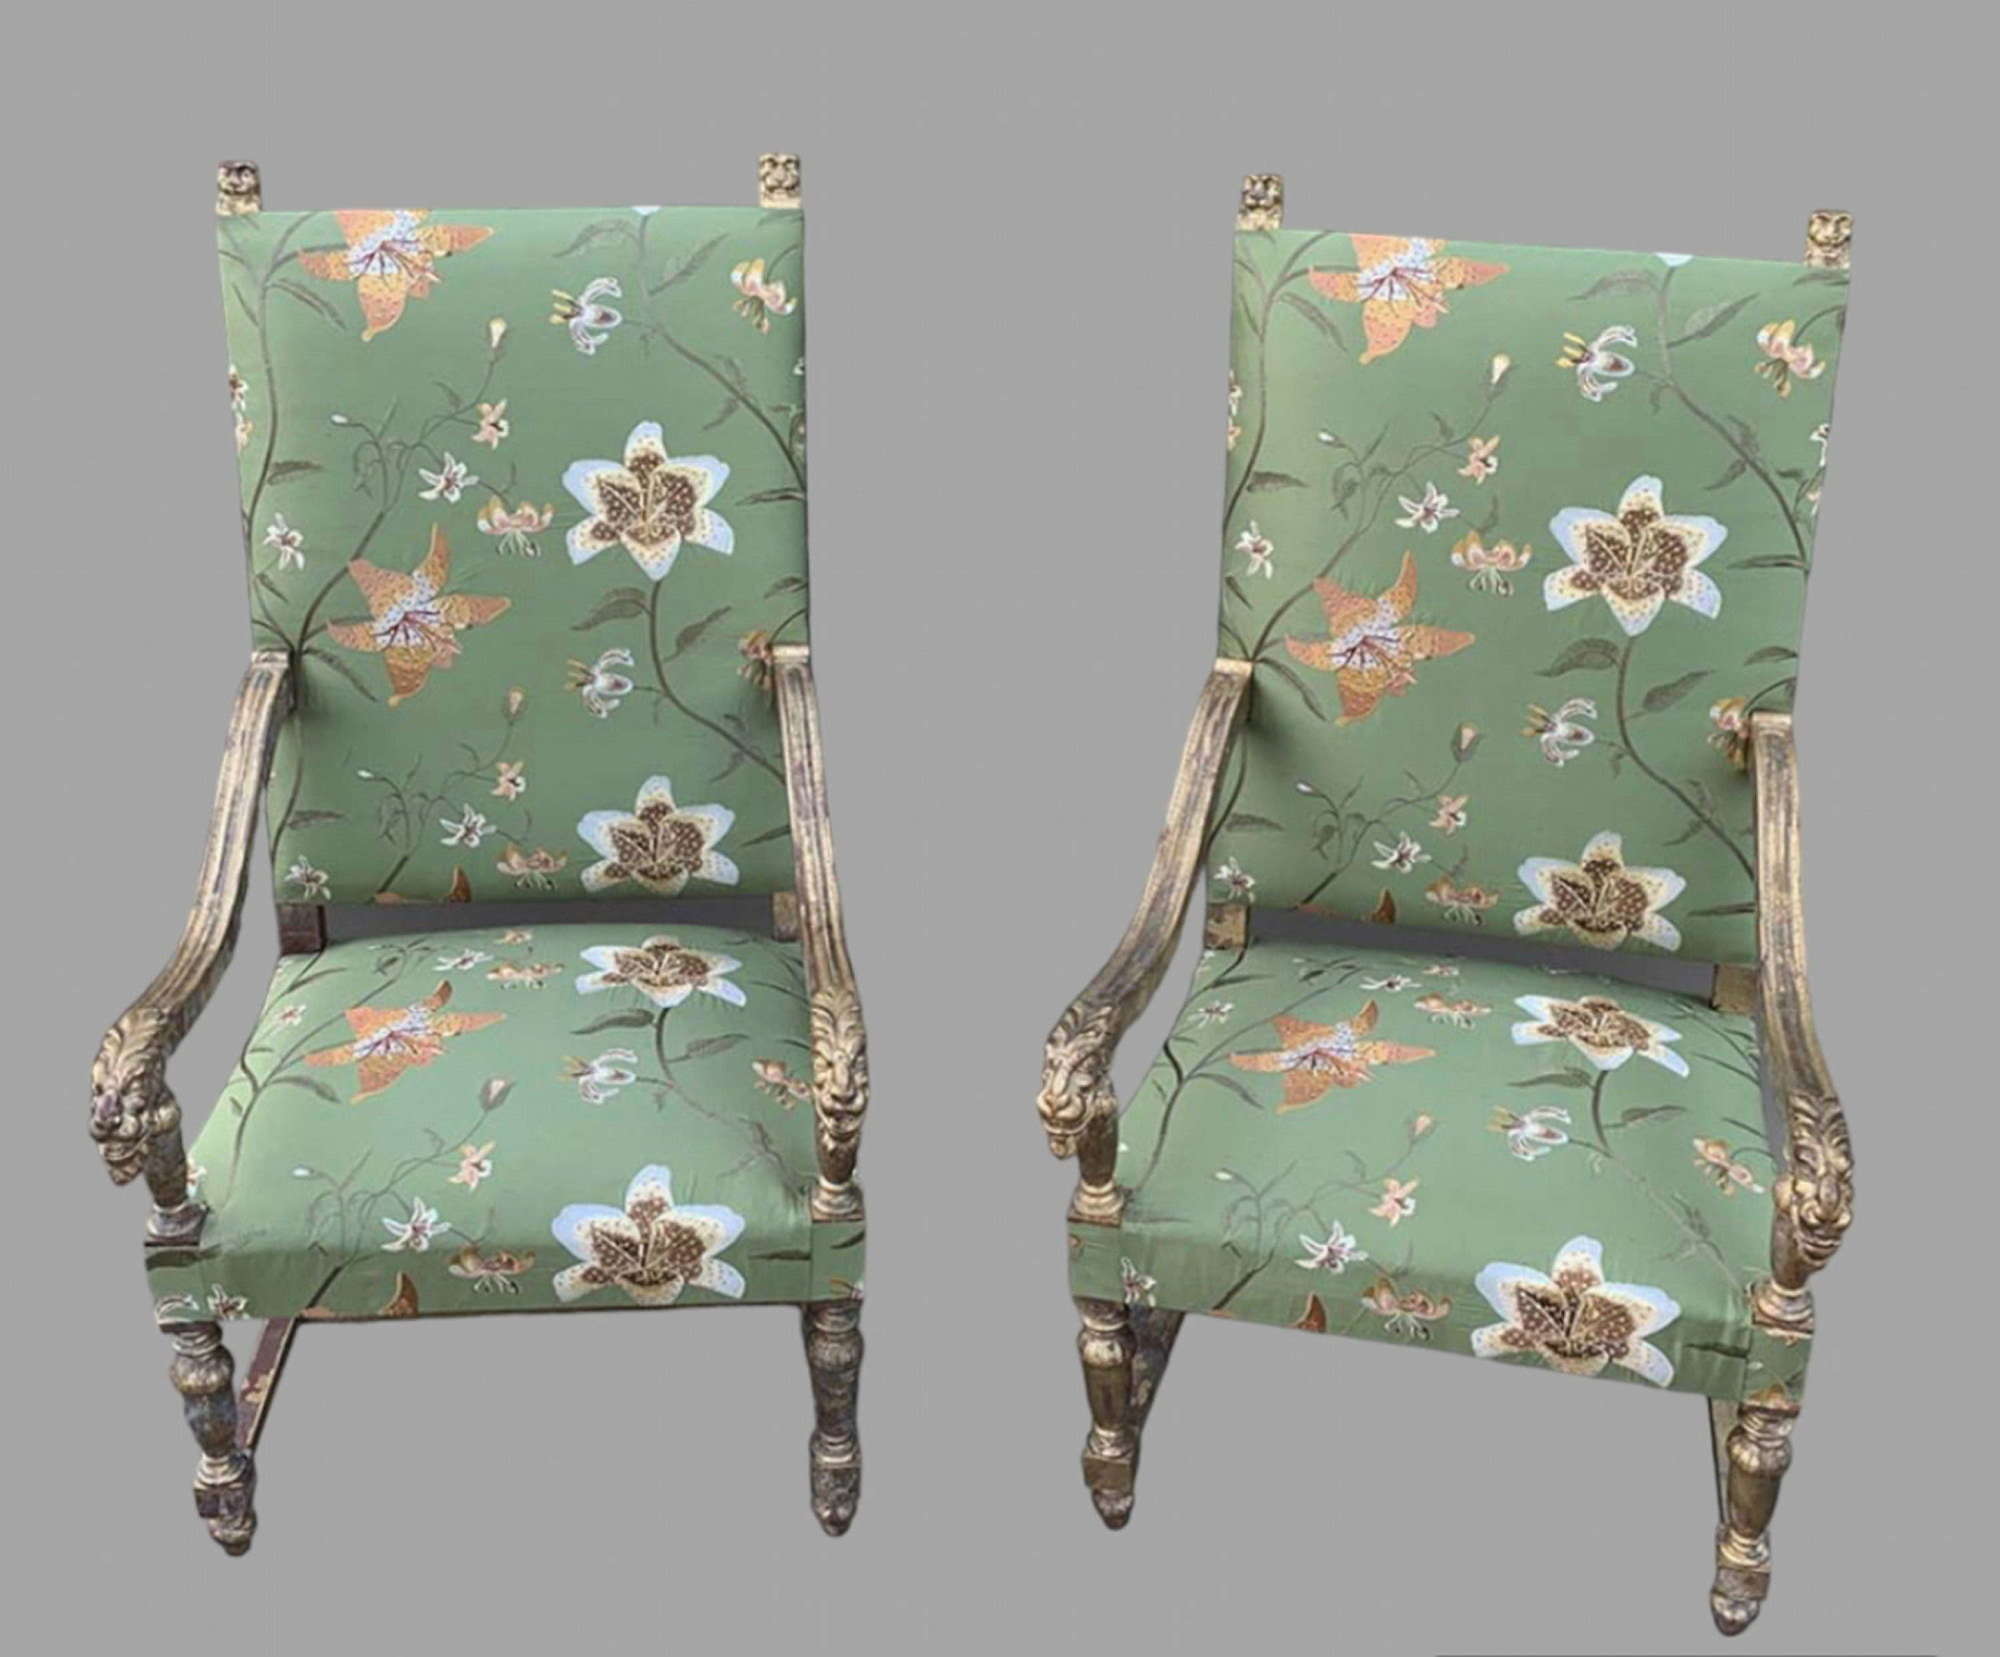 A Fabulous Pair of Distressed Gilt Framed Armchairs